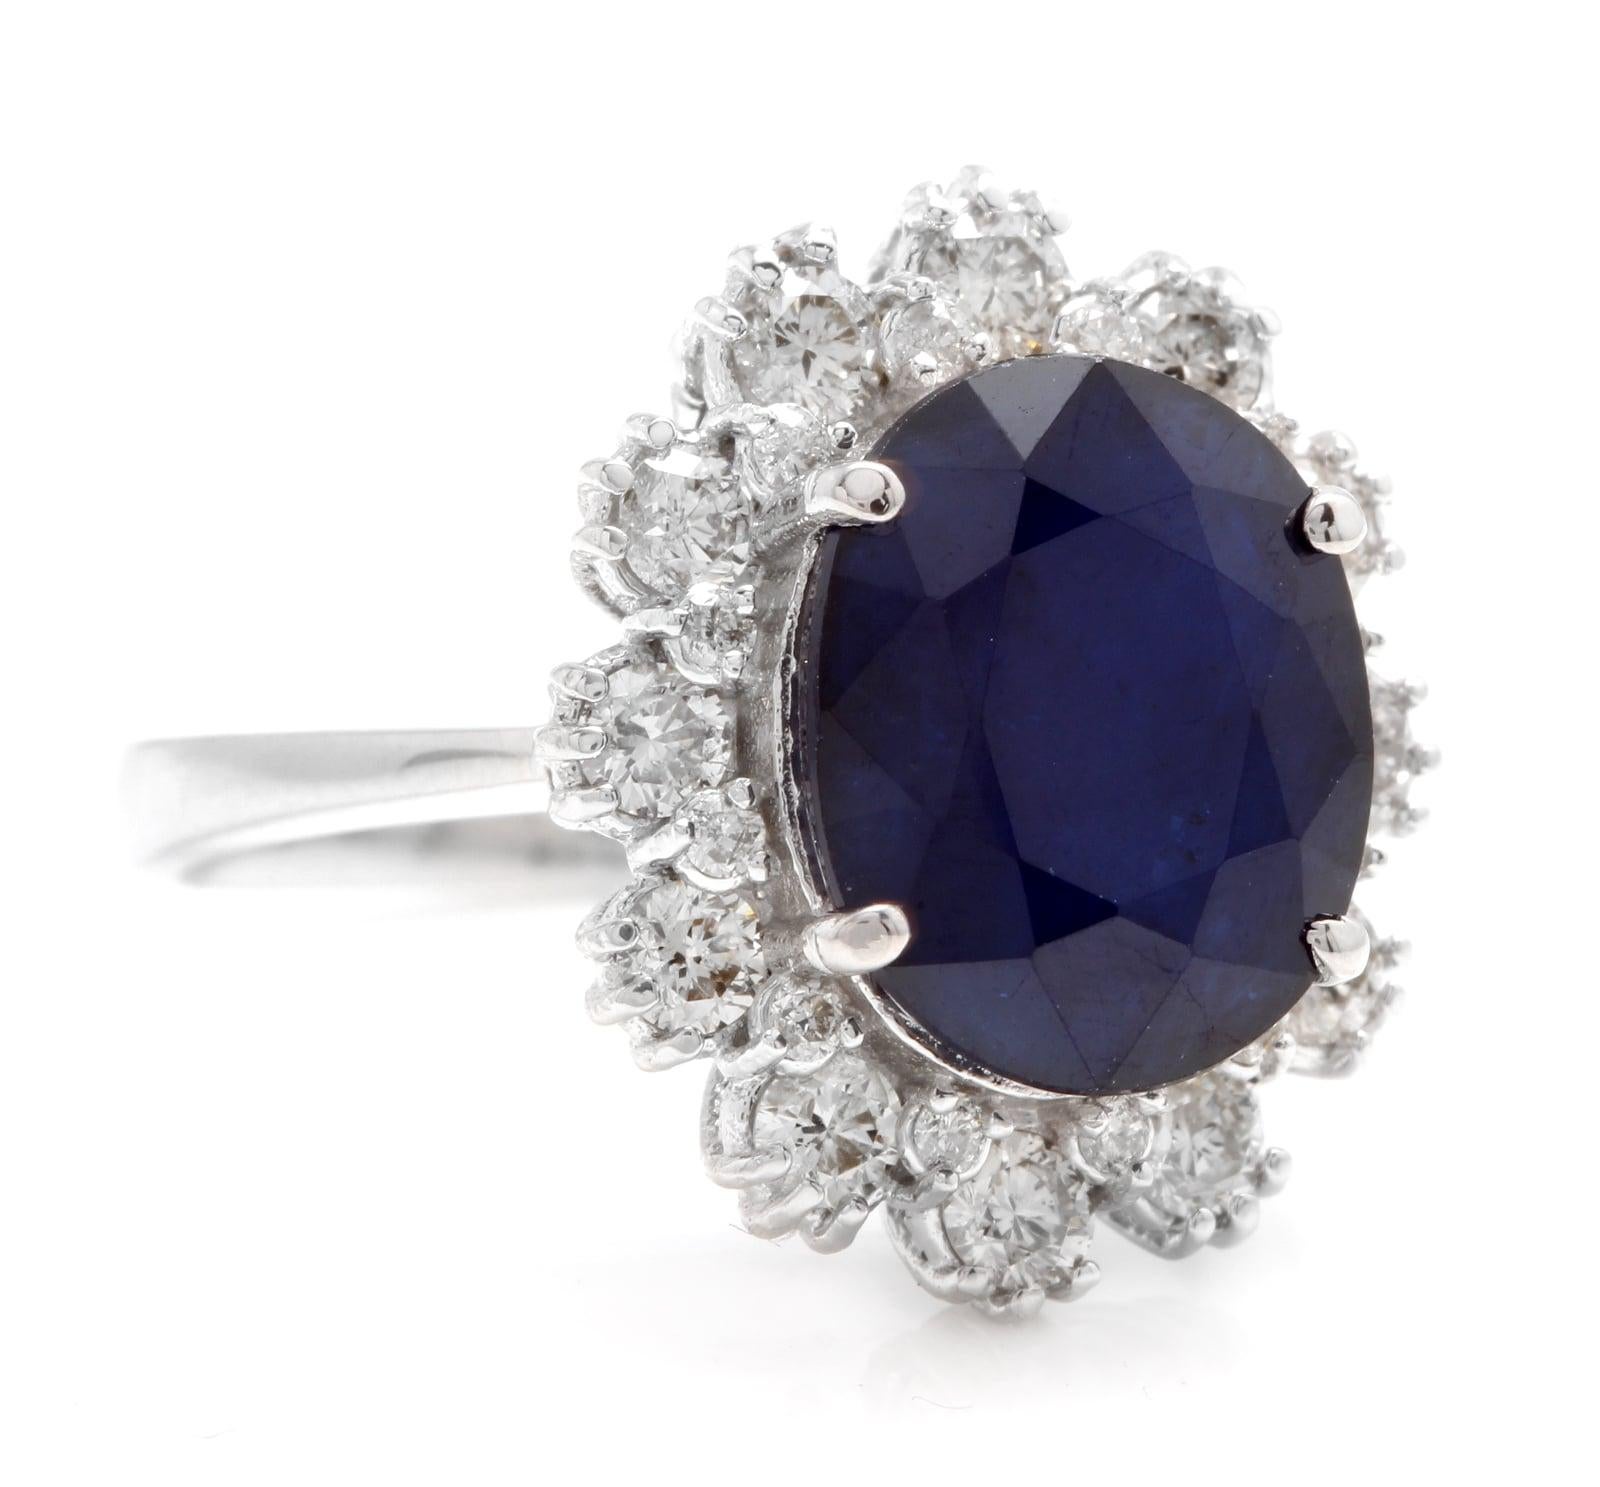 7.20 Carats Natural Sapphire and Diamond 18K Solid White Gold Ring

Total Natural Oval Cut Sapphire Weights: Approx. 6.00 Carats

Sapphire Measures: Approx. 12.00 x 10.00mm

Sapphire Treatment: Diffusion

Natural Round Diamonds Weight: Approx. 1.20